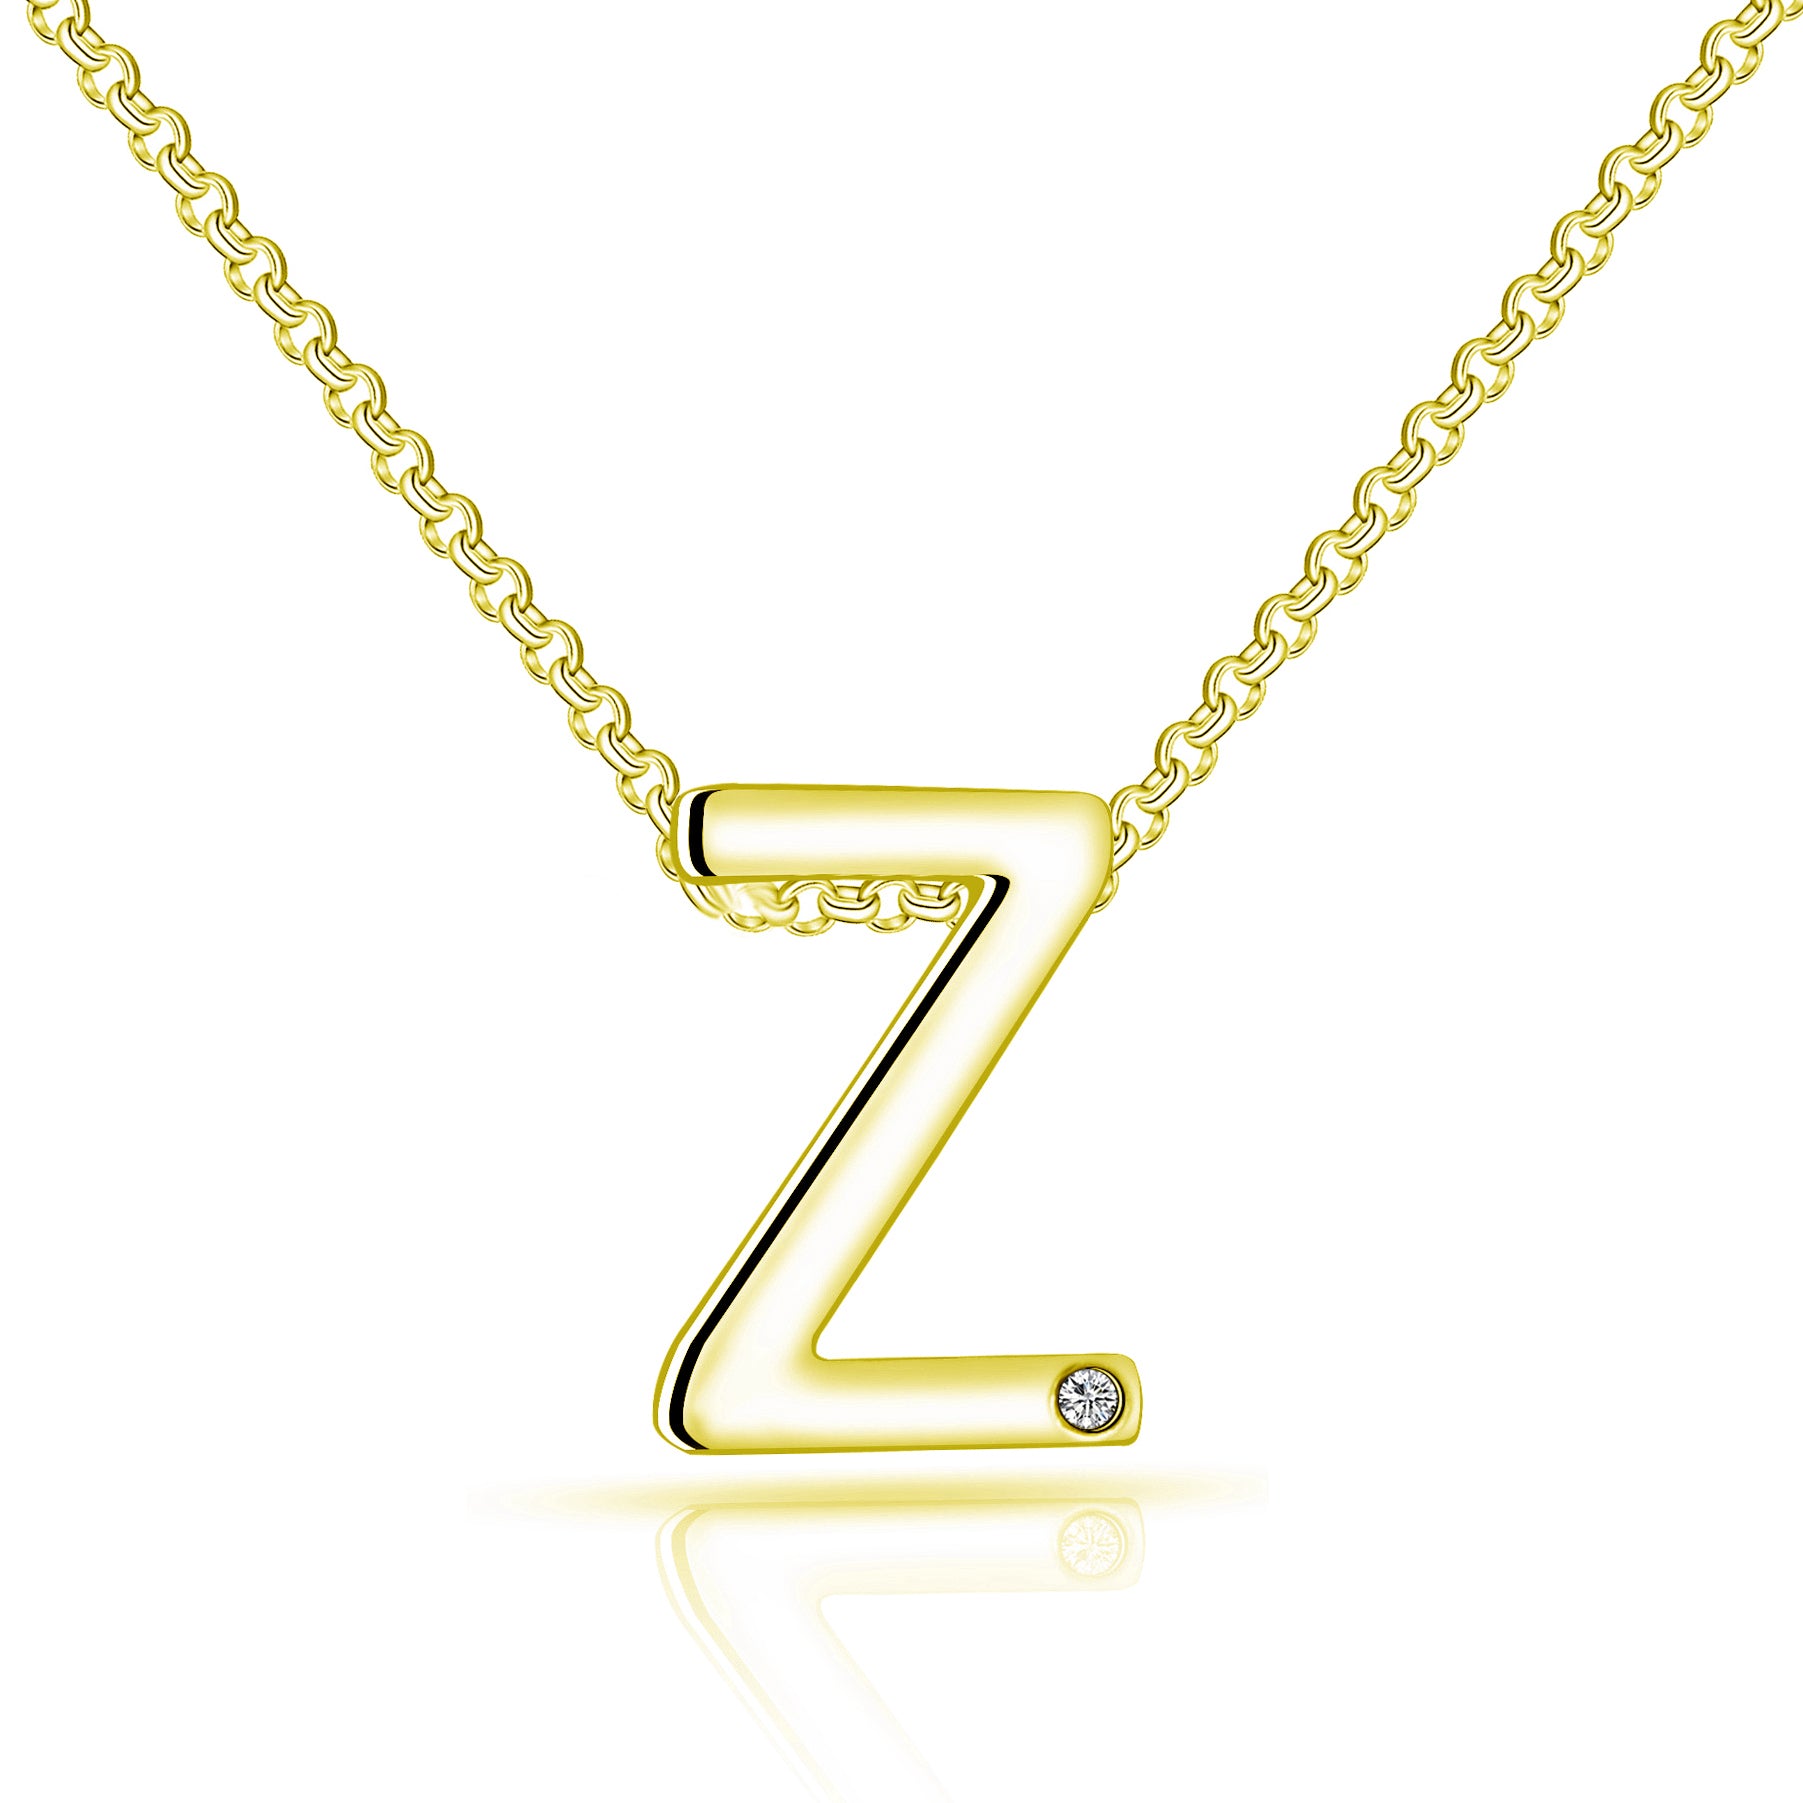 Gold Plated Initial Necklace Letter Z Created with Zircondia® Crystals by Philip Jones Jewellery